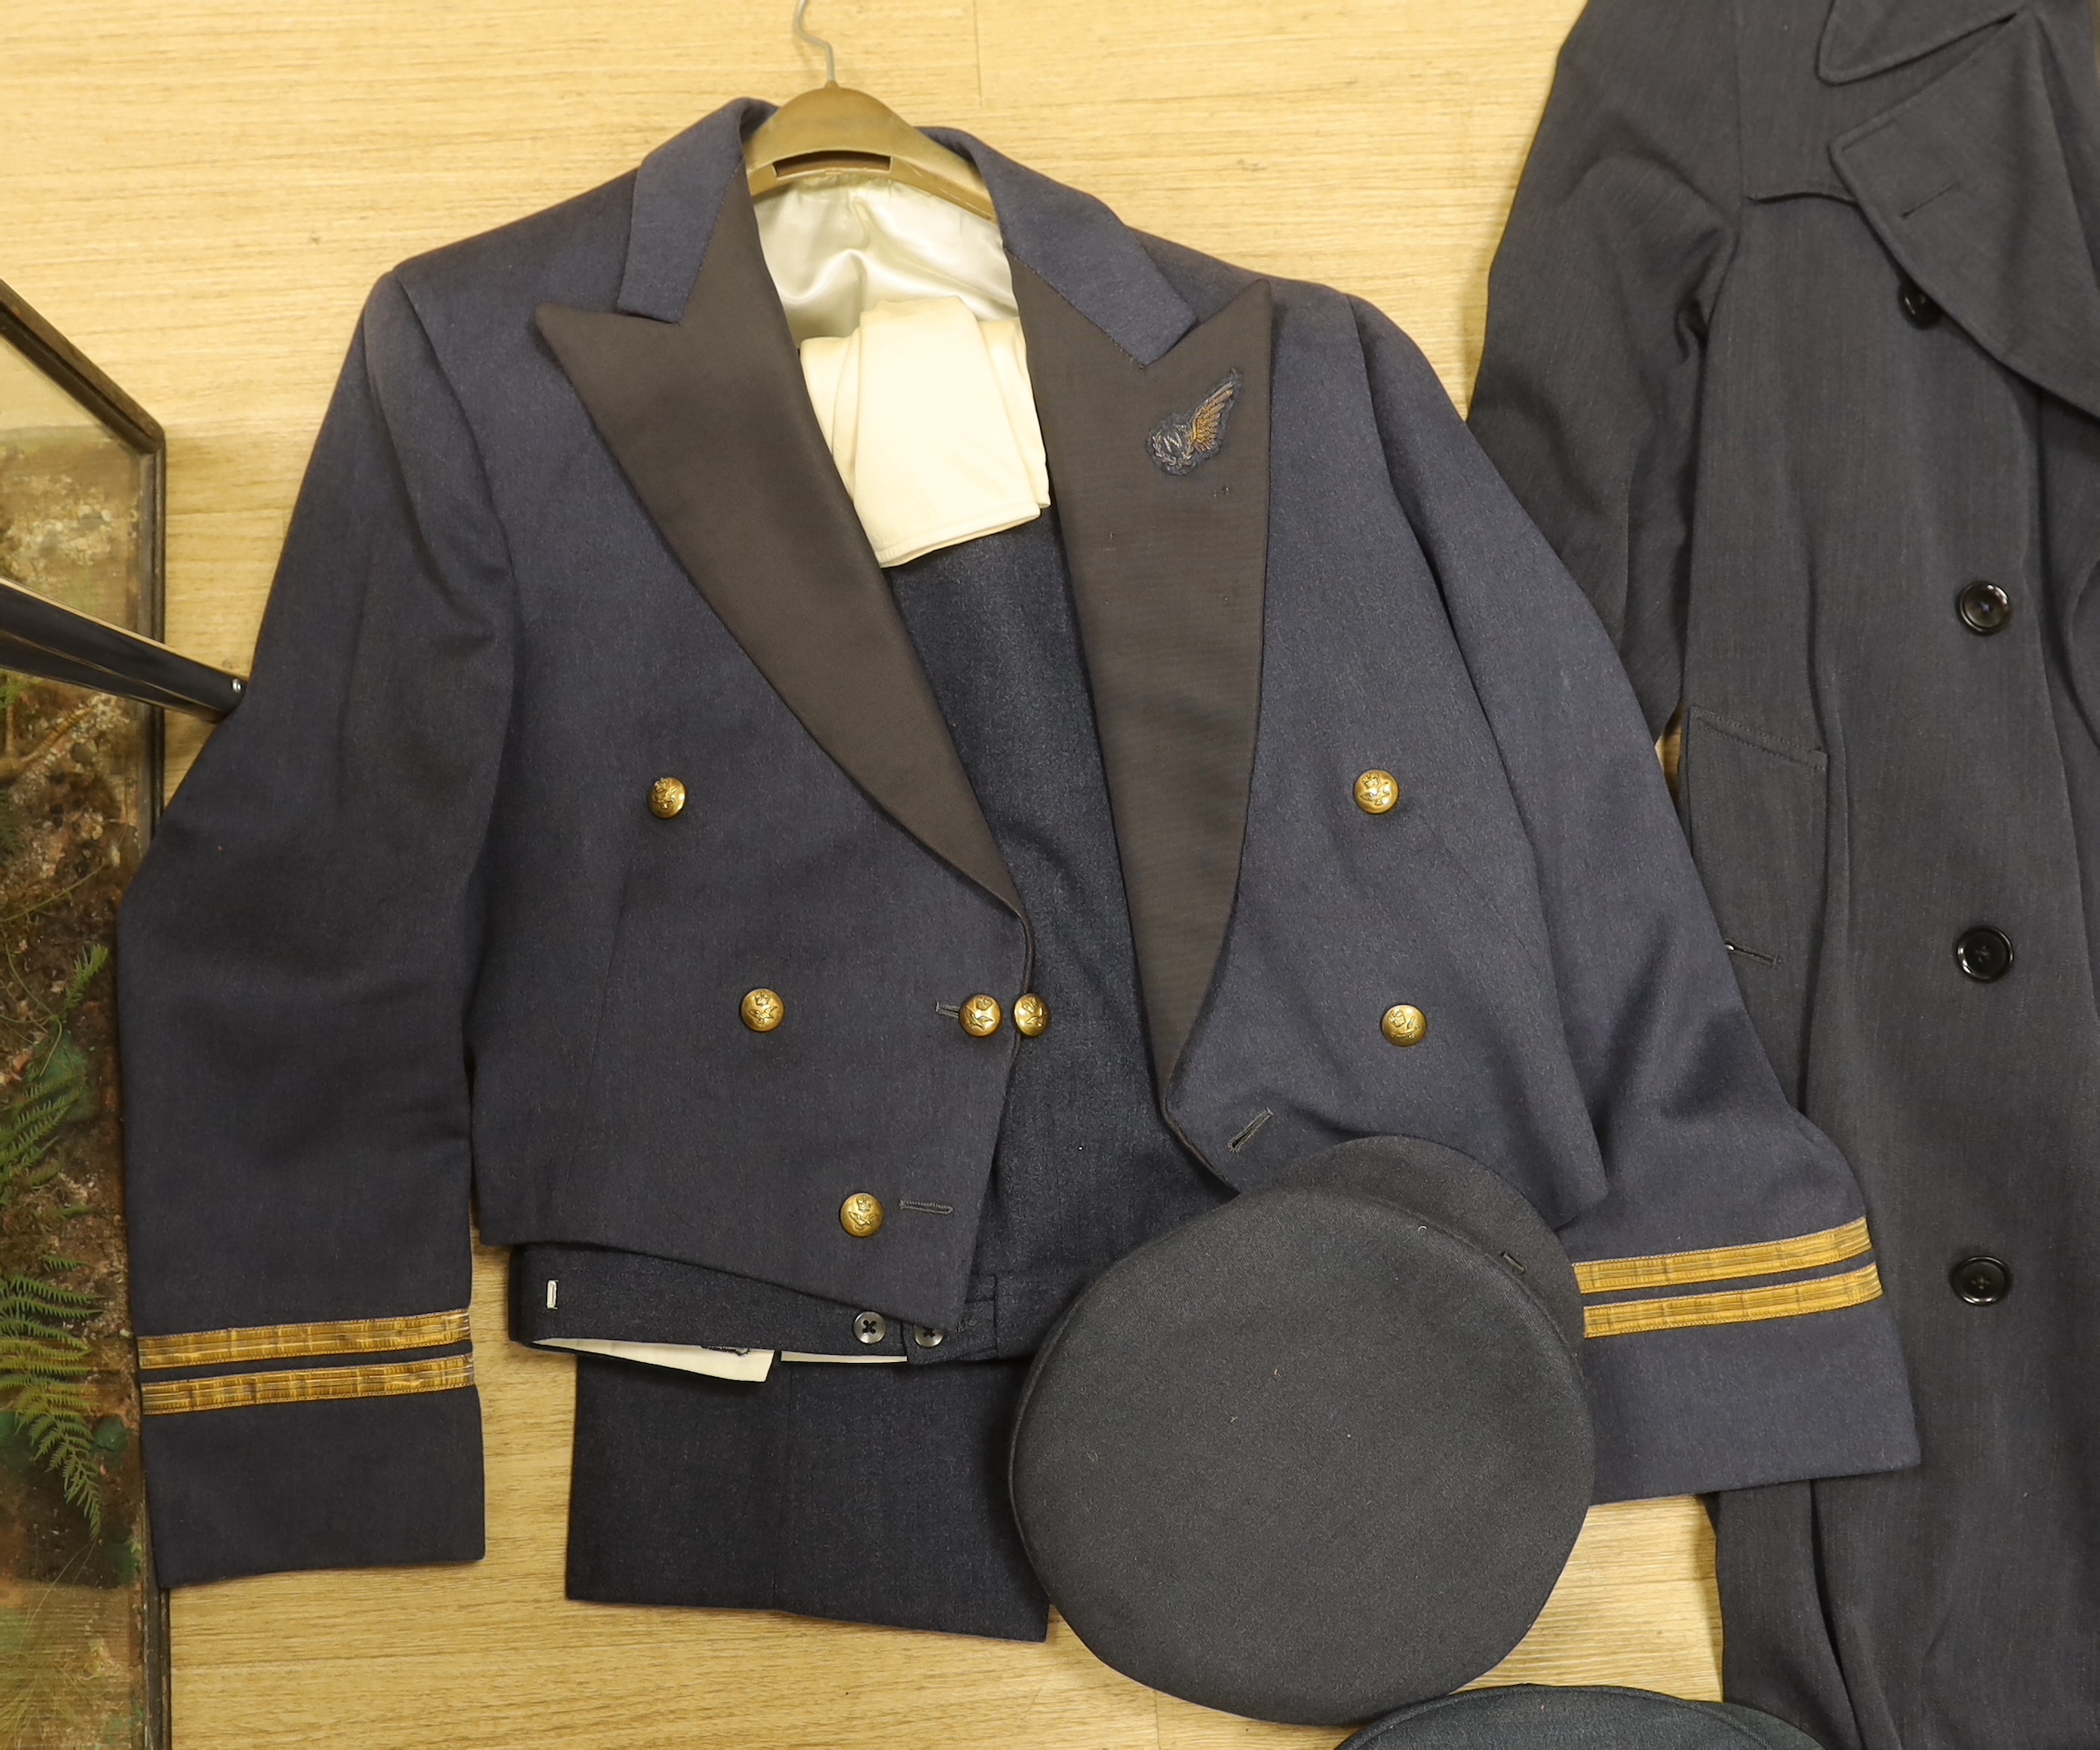 A collection of post-war RAF uniforms, comprising; two caps, double-breasted overcoat, dress uniform of jacket, trousers and gloves, two sets of jacket and trousers with ribbons for WWII awards, plus a pair of navigator’